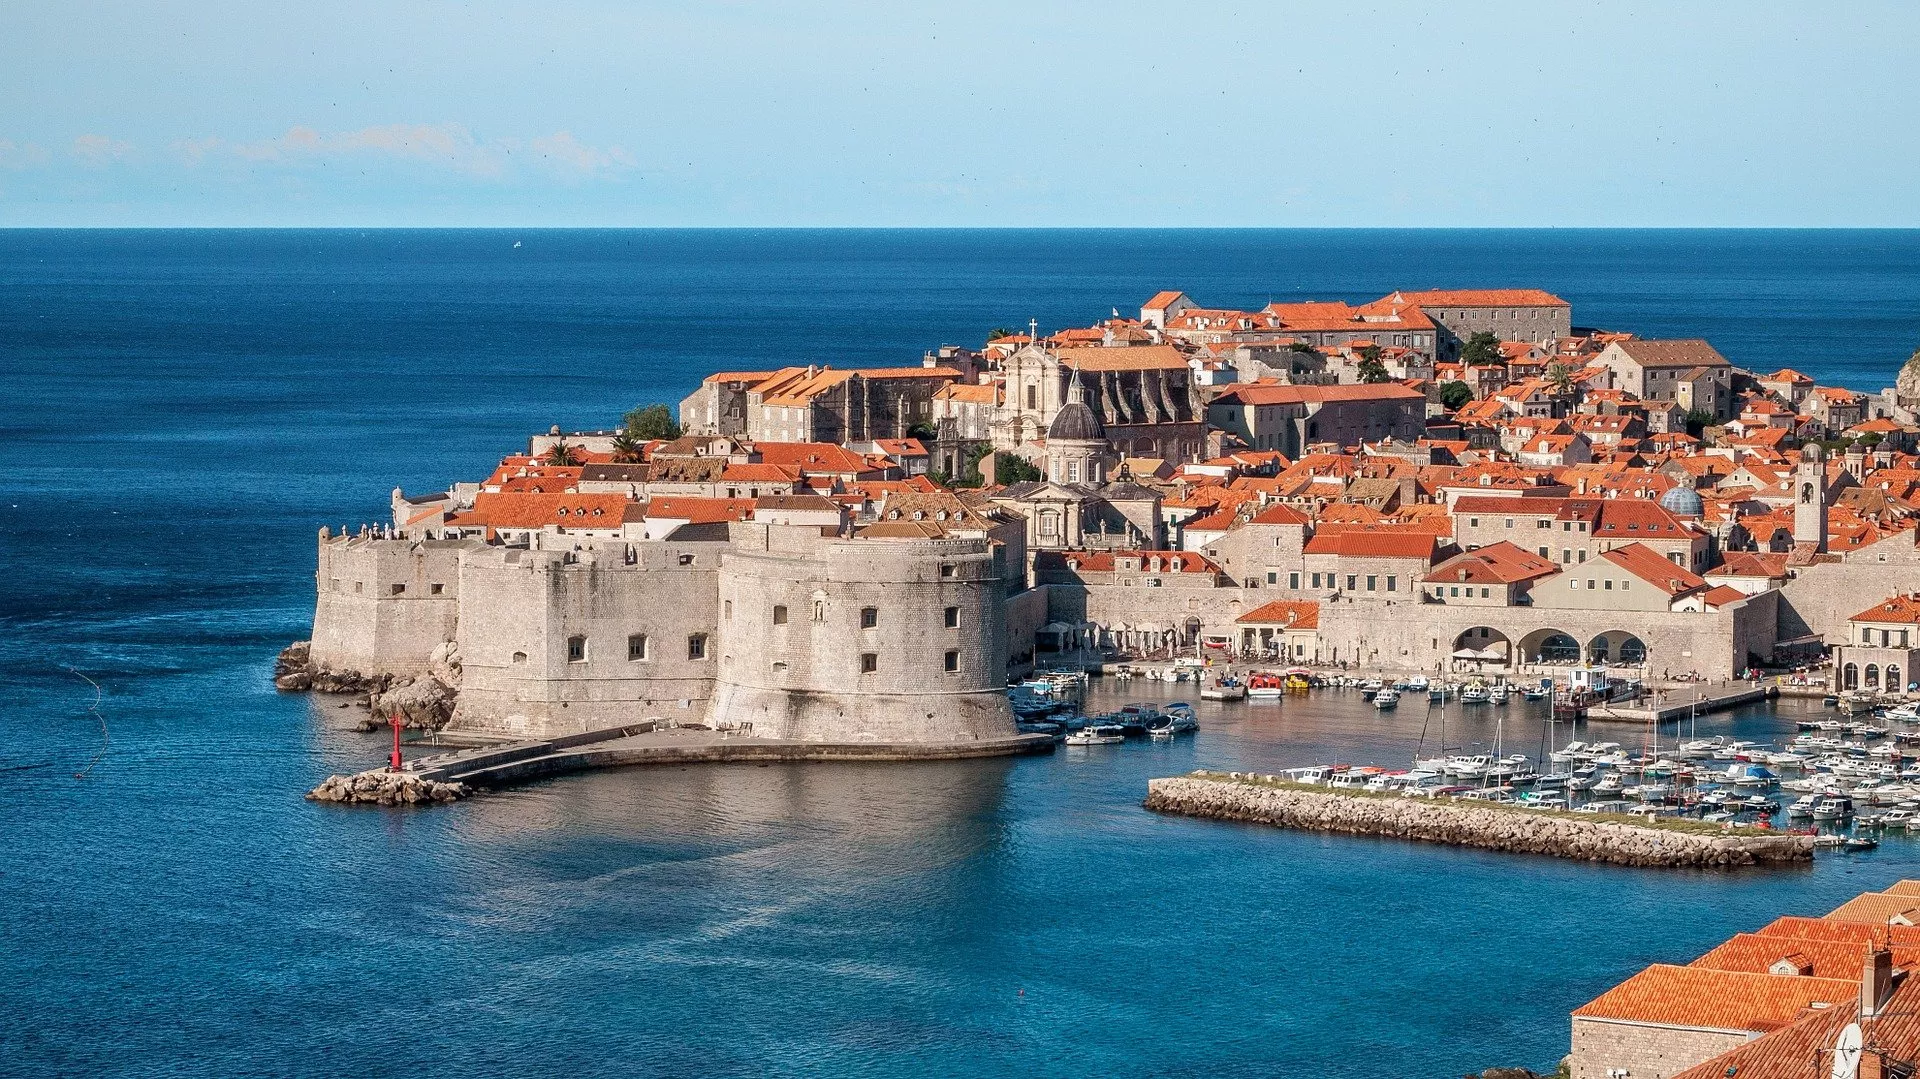 Main image of article: A holiday in Dubrovnik…